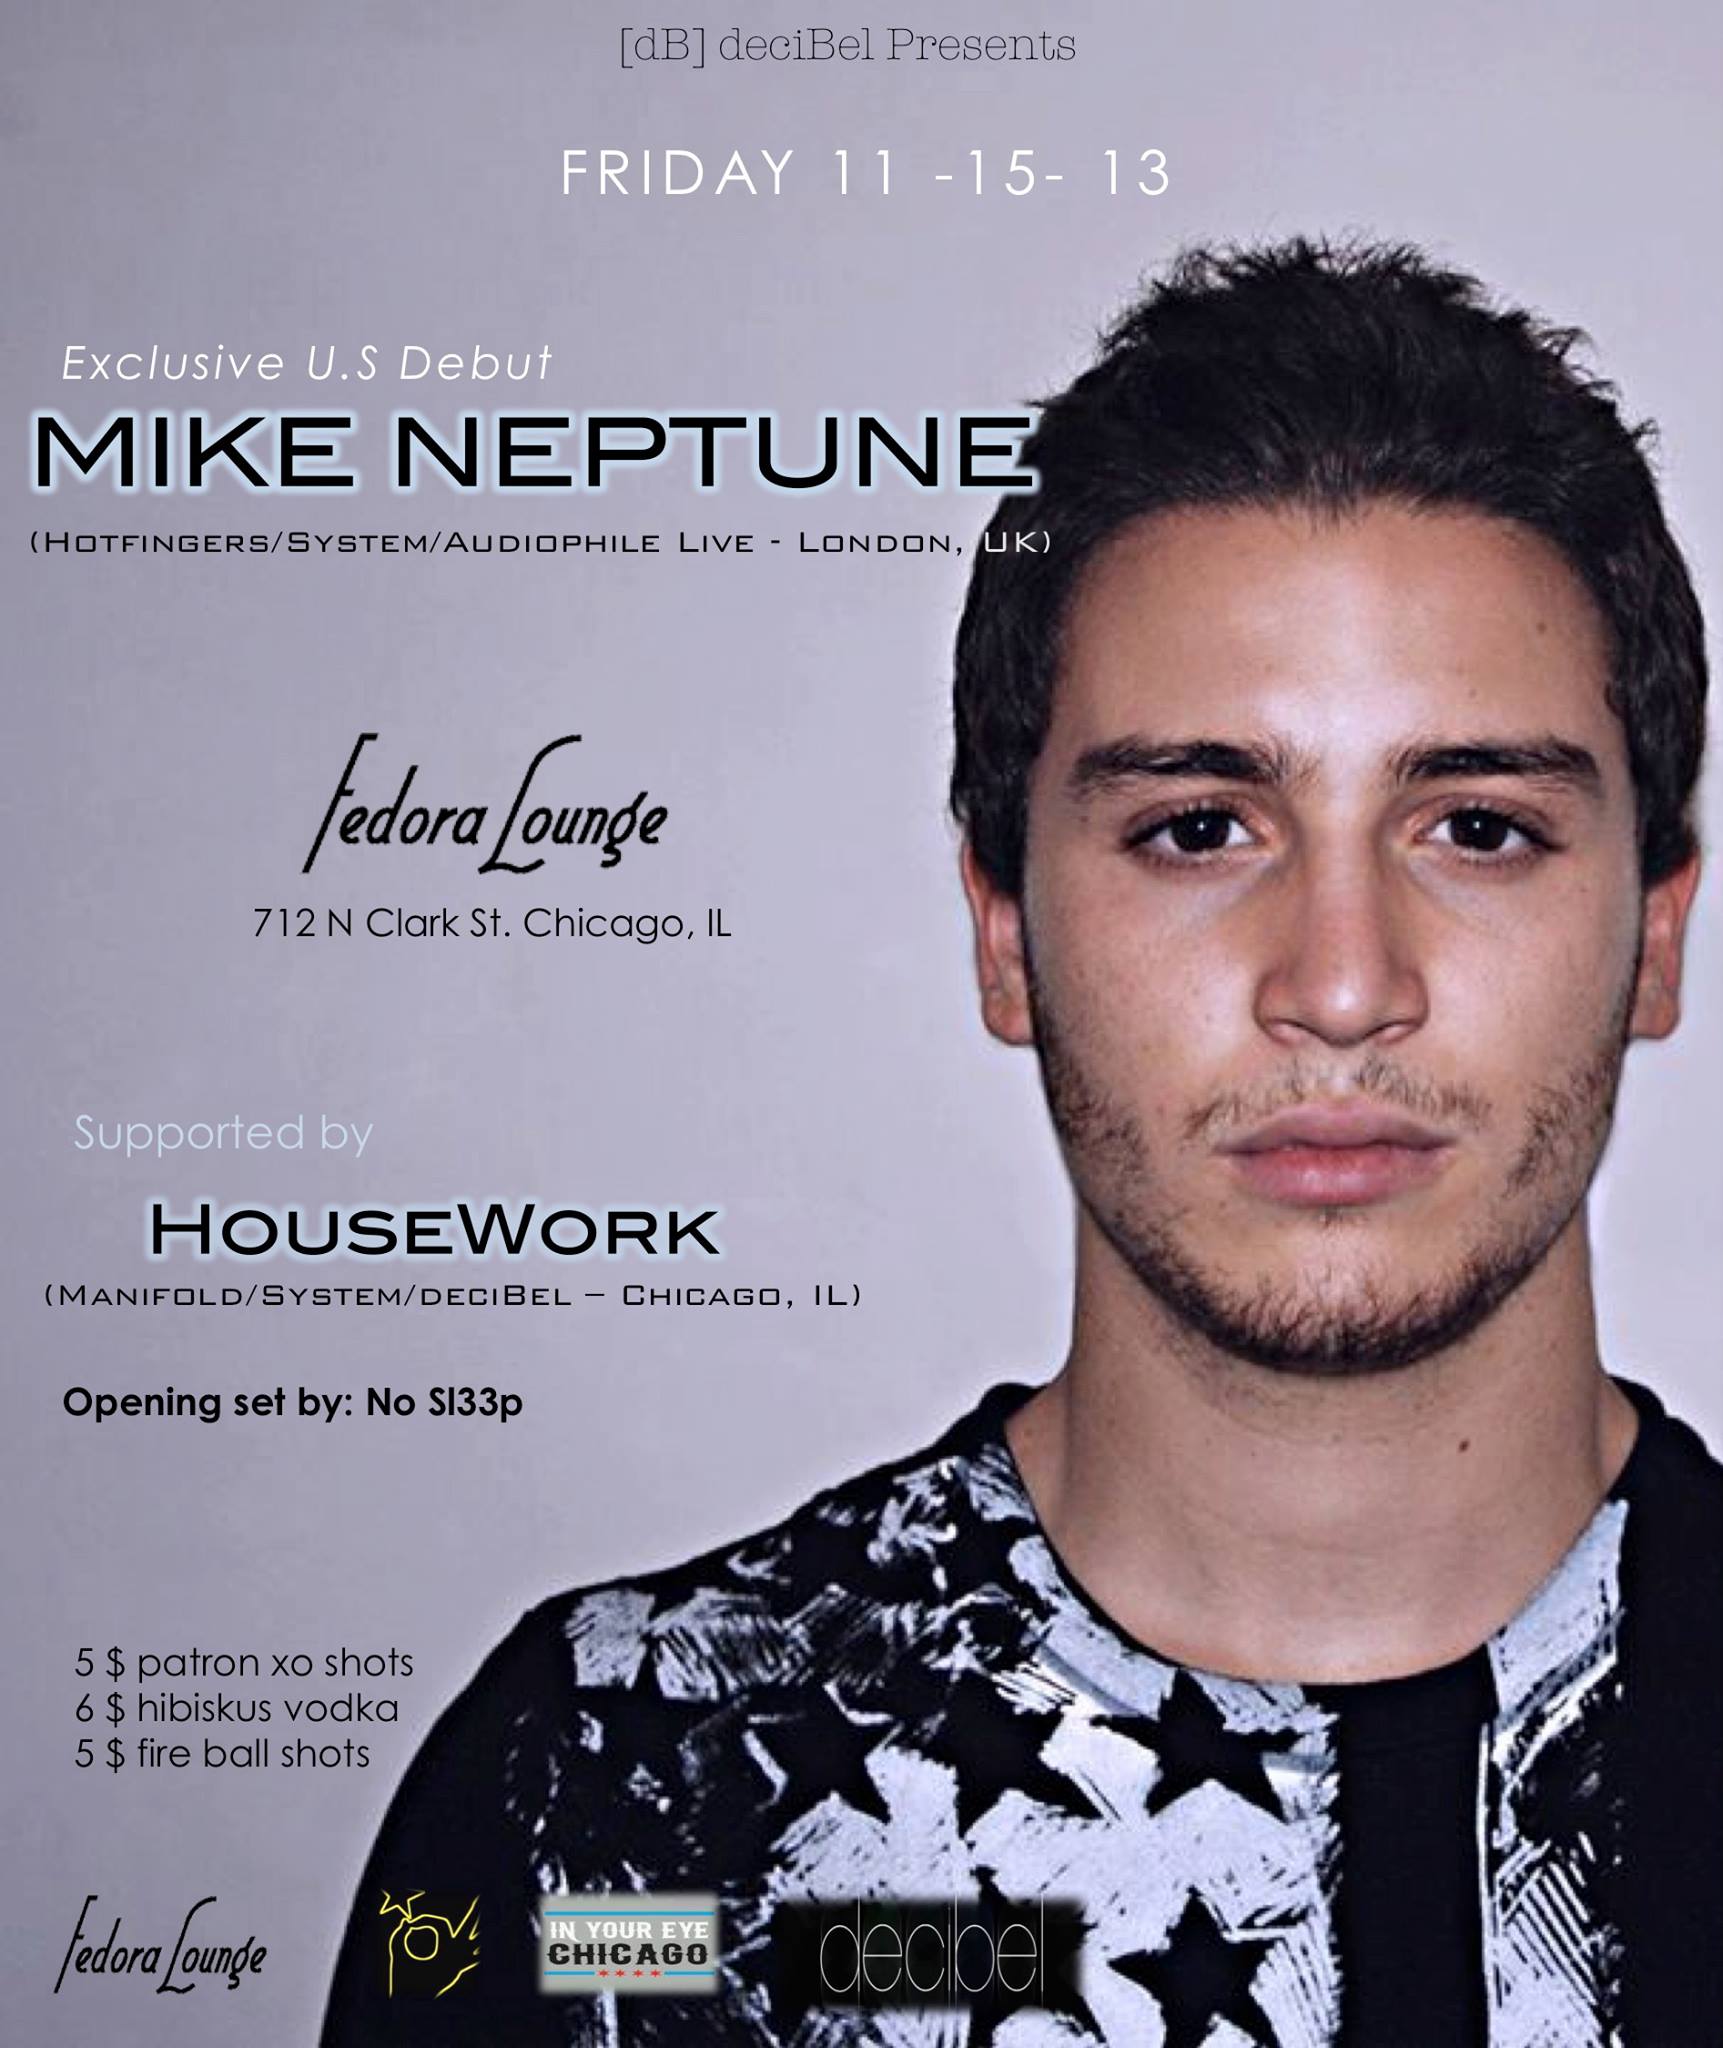 After Ministry of Sound Club, Pacha London, Pacha Marrakech & Egg London, Progressive and Tech House DJ/Producer MIKE NEPTUNE will be in town for an Exclusive U.S Debut set. Making a Buzz in the London Underground club scene in the past couple of years, Mike Neptune has released tracks supported and played by :  Tiësto, Markus Schulz, Mark Pledger, Sean Tyas, Myon and Shane 54, Ming, Kyau & Albert, Artento Divini, Robert Vadney, Gareth Emery, Matt Cerf, Reepr, Suzy Solar & Many More ... https://www.facebook.com/mikeneptune https://soundcloud.com/mike_neptune http://www.beatport.com/artist/mike-neptune/208250 